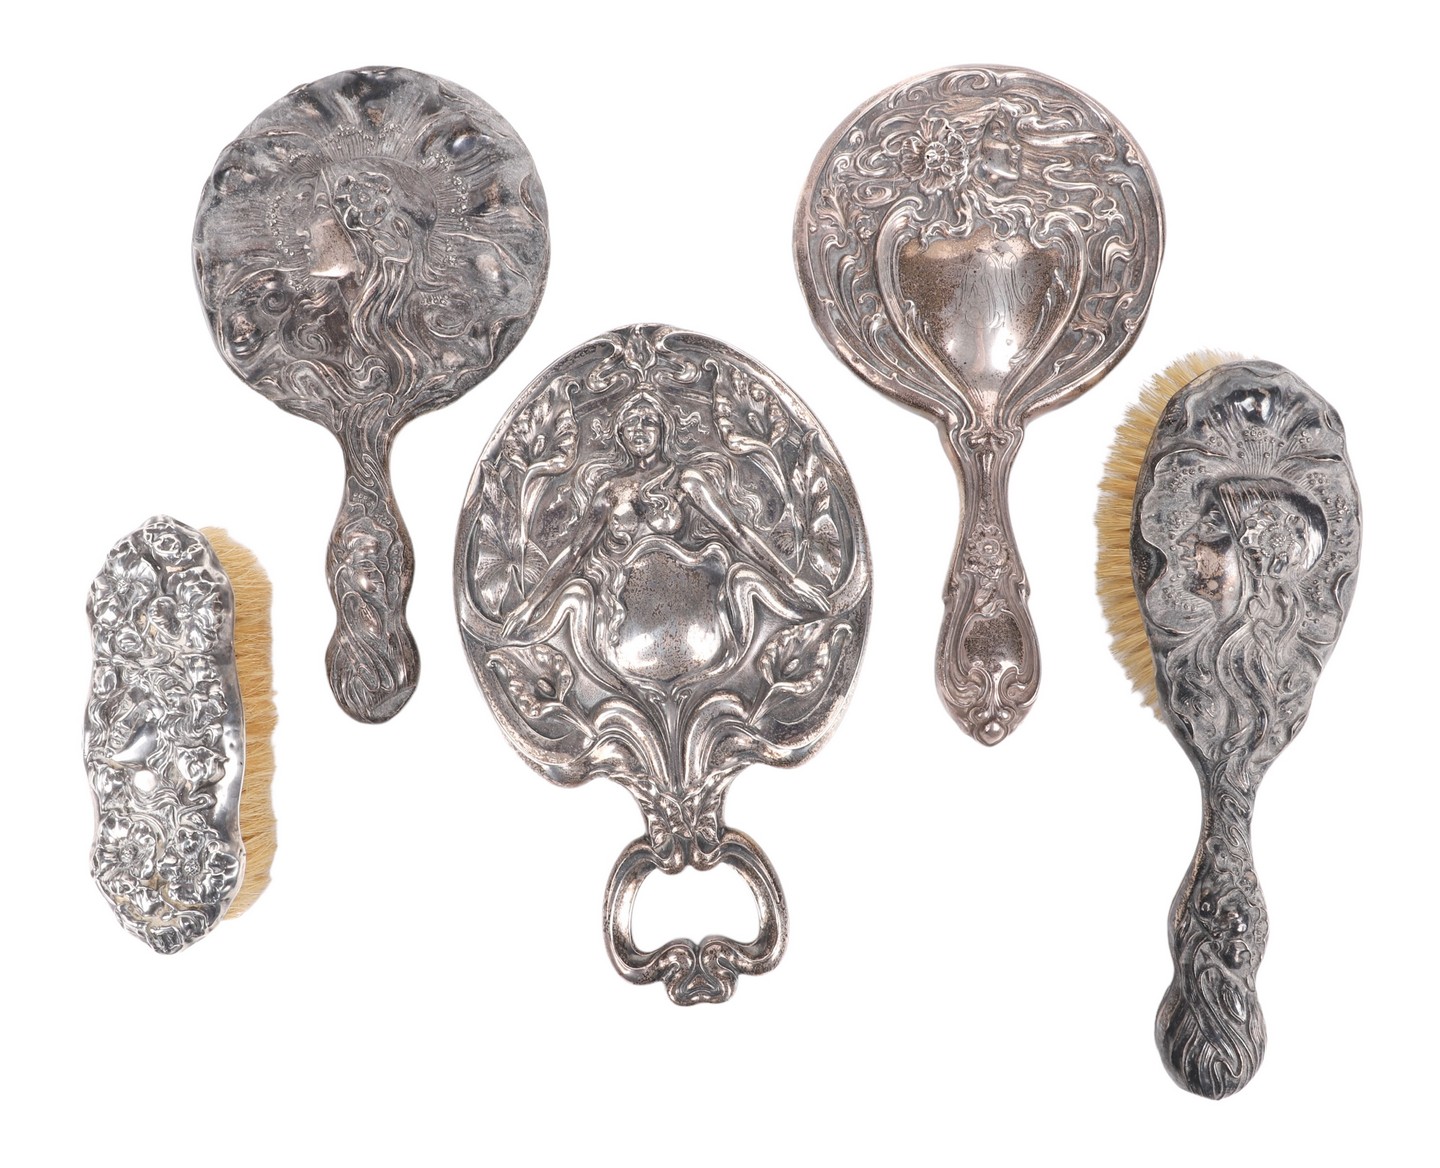  5 Sterling repousse dresser items 317e65